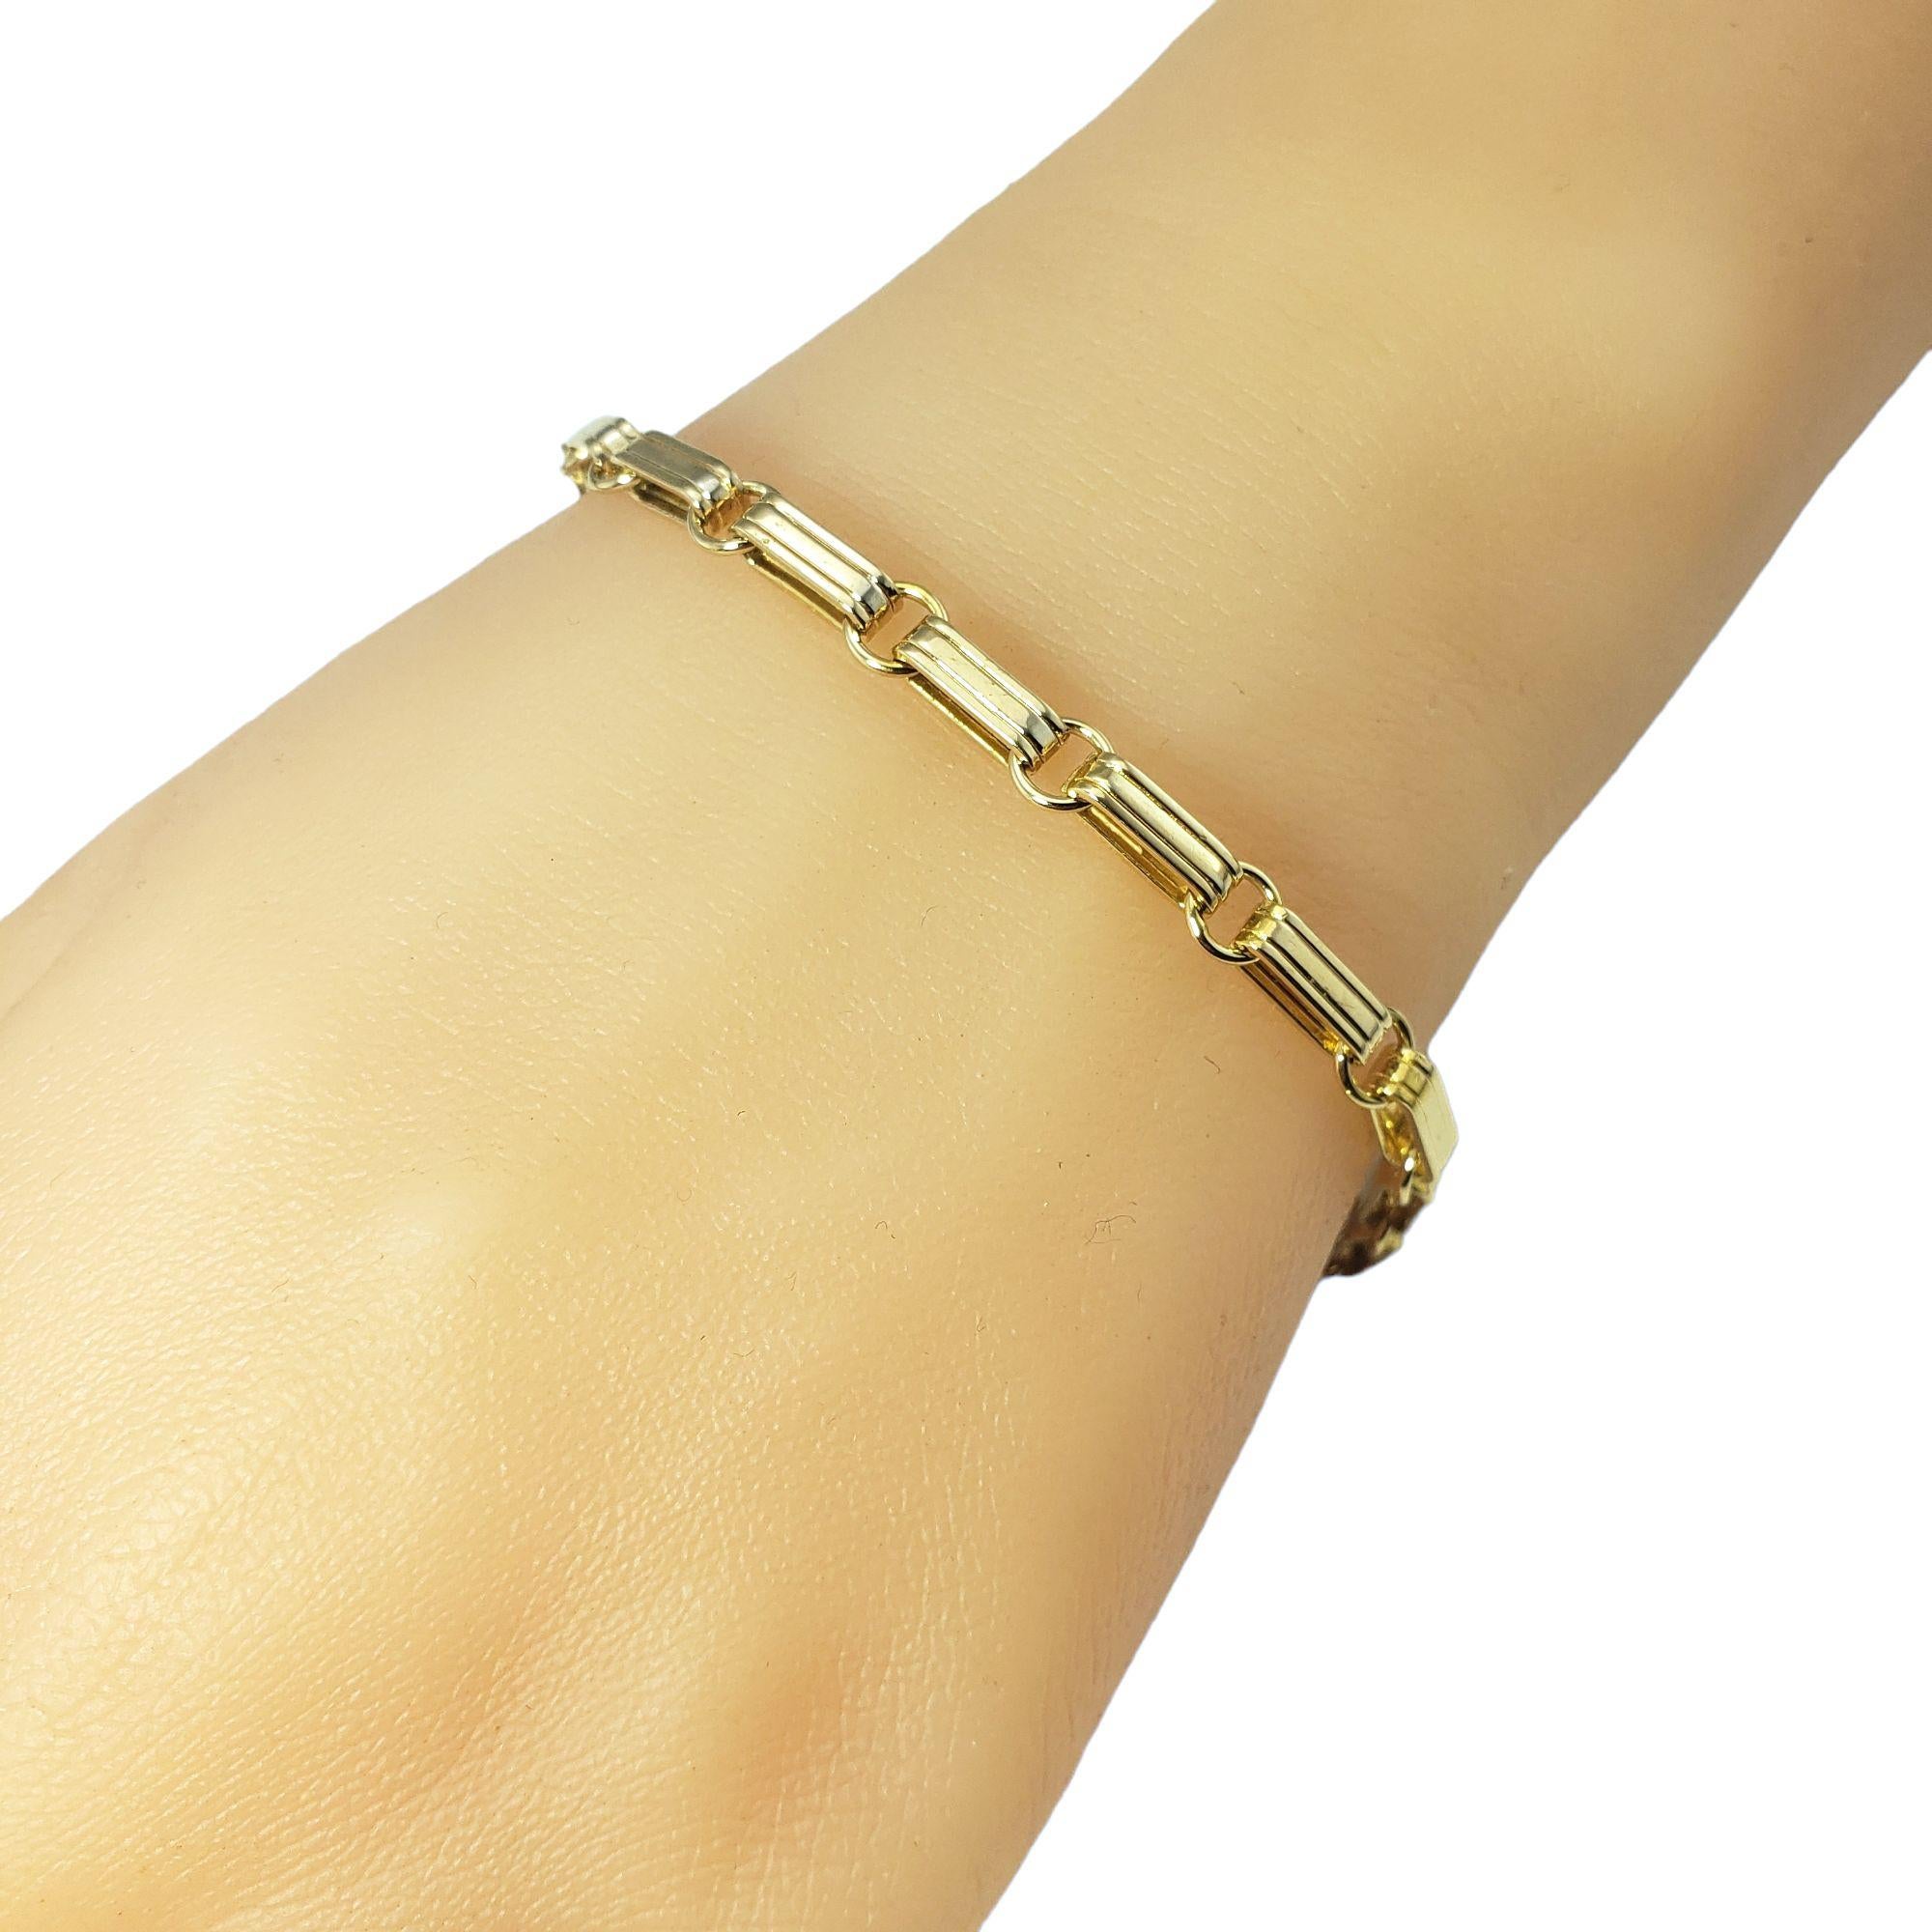 Vintage 14 Karat Yellow Gold Link Bracelet-

This elegant link bracelet is crafted in meticulously detailed 14K yellow gold. Width: 3 mm.

Size: 6.75 inches

Weight: 6.2 dwt. / 9.7 gr.

Stamped: 14K Italy

Very good condition, professionally